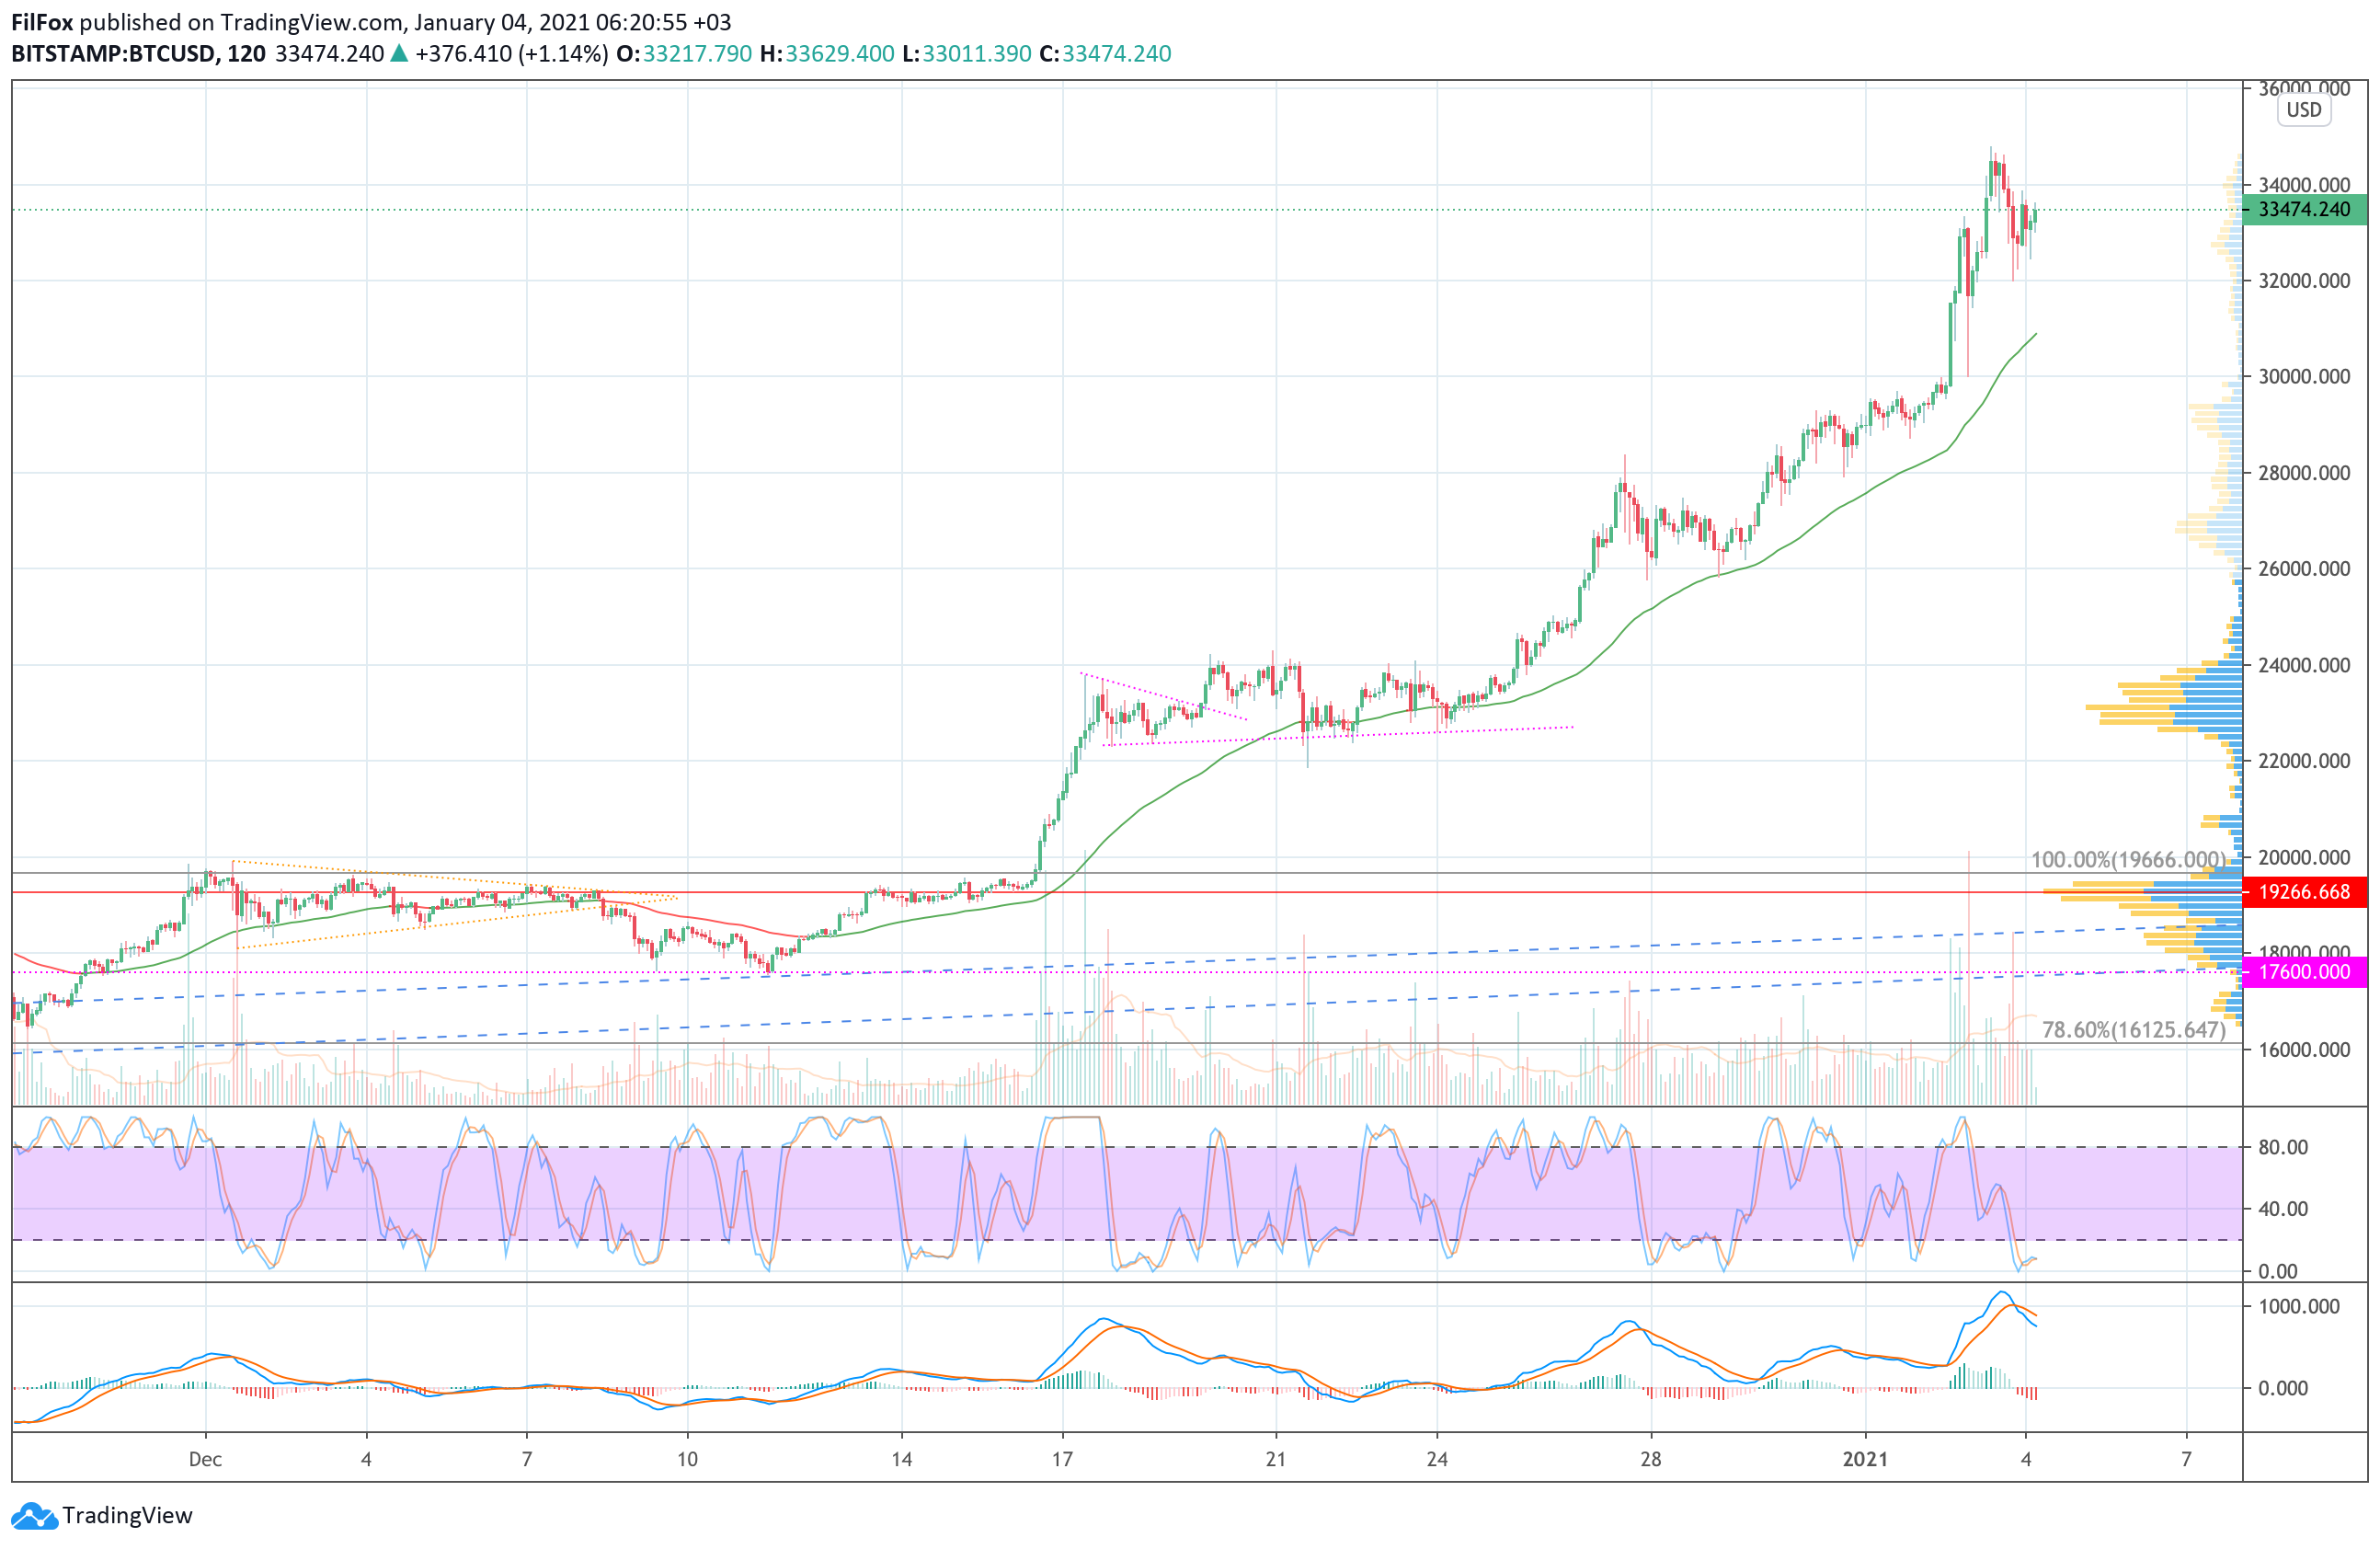 Analysis of prices for Bitcoin, Ethereum, Ripple for 01/04/2021